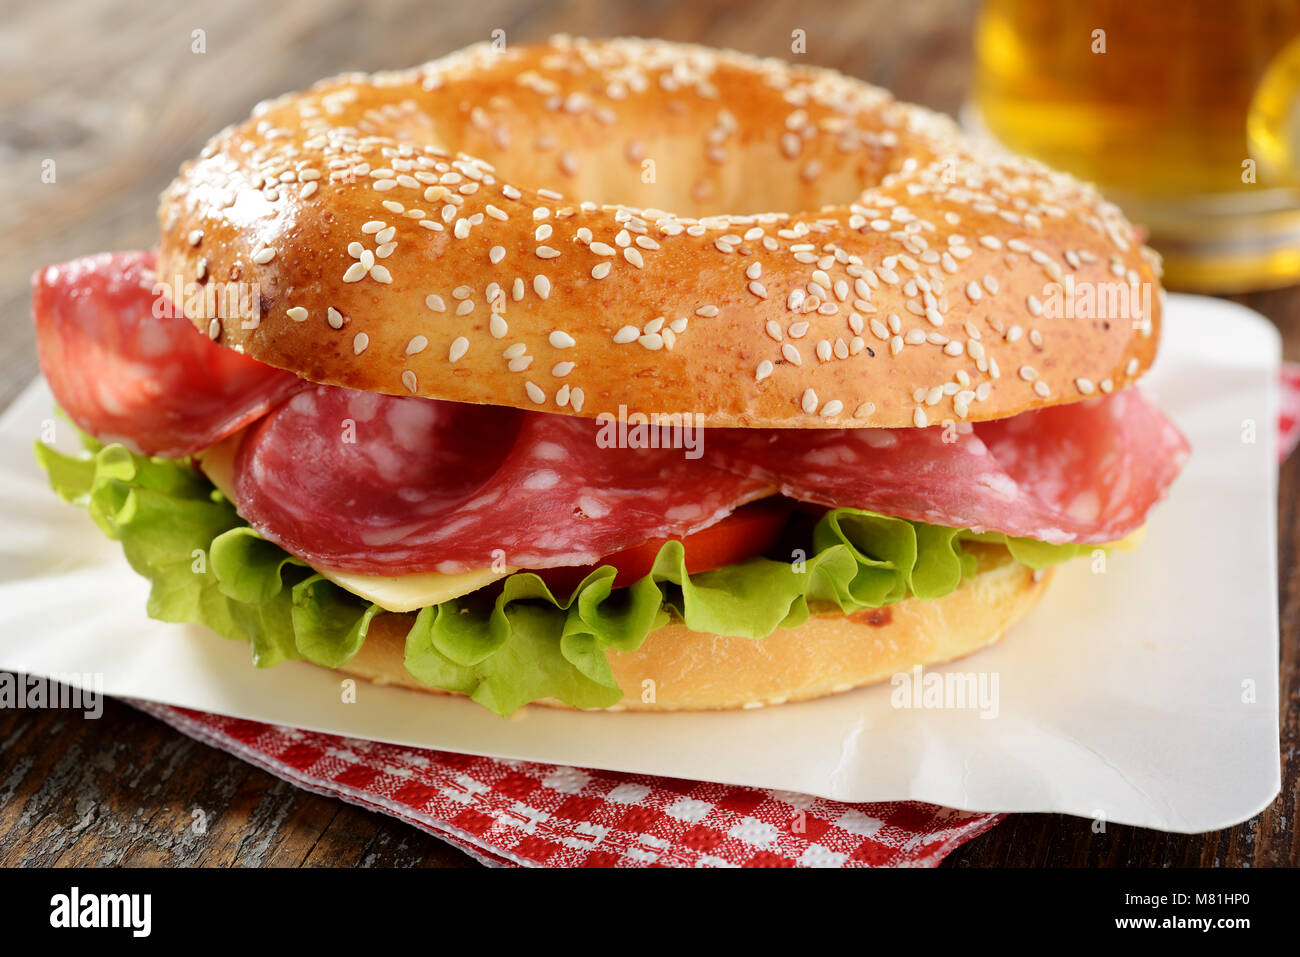 Bagel sandwich with sausage, cheese, and lettuce Stock Photo